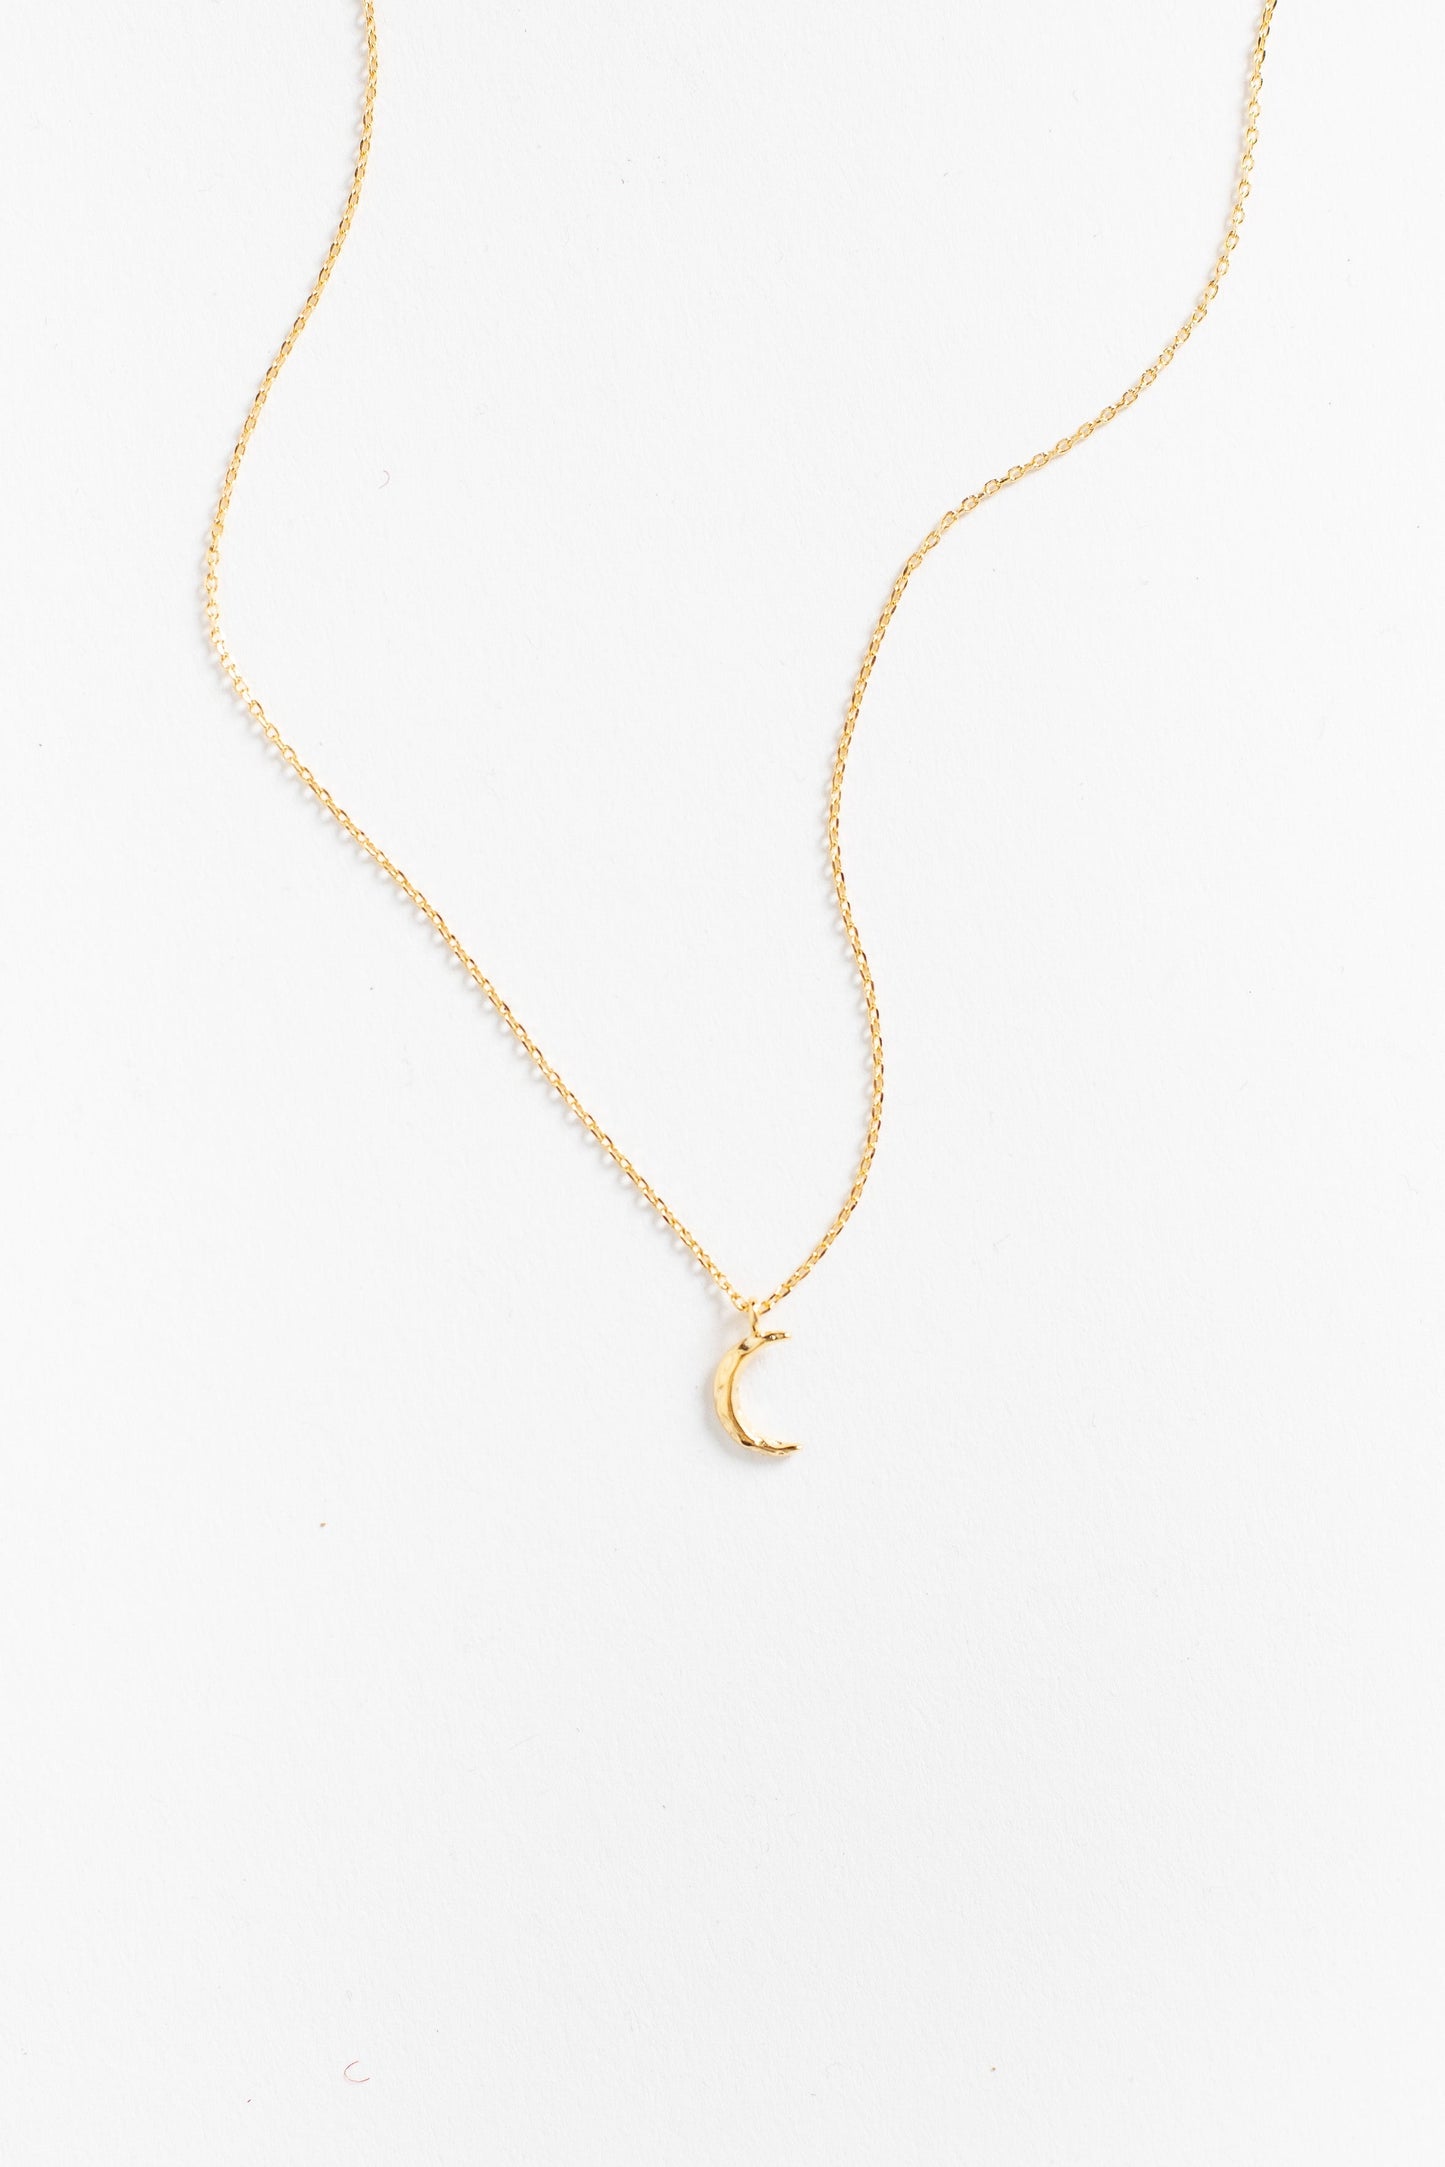 Dainty Moon Necklace WOMEN'S NECKLACE Cove Gold Plated 16" 